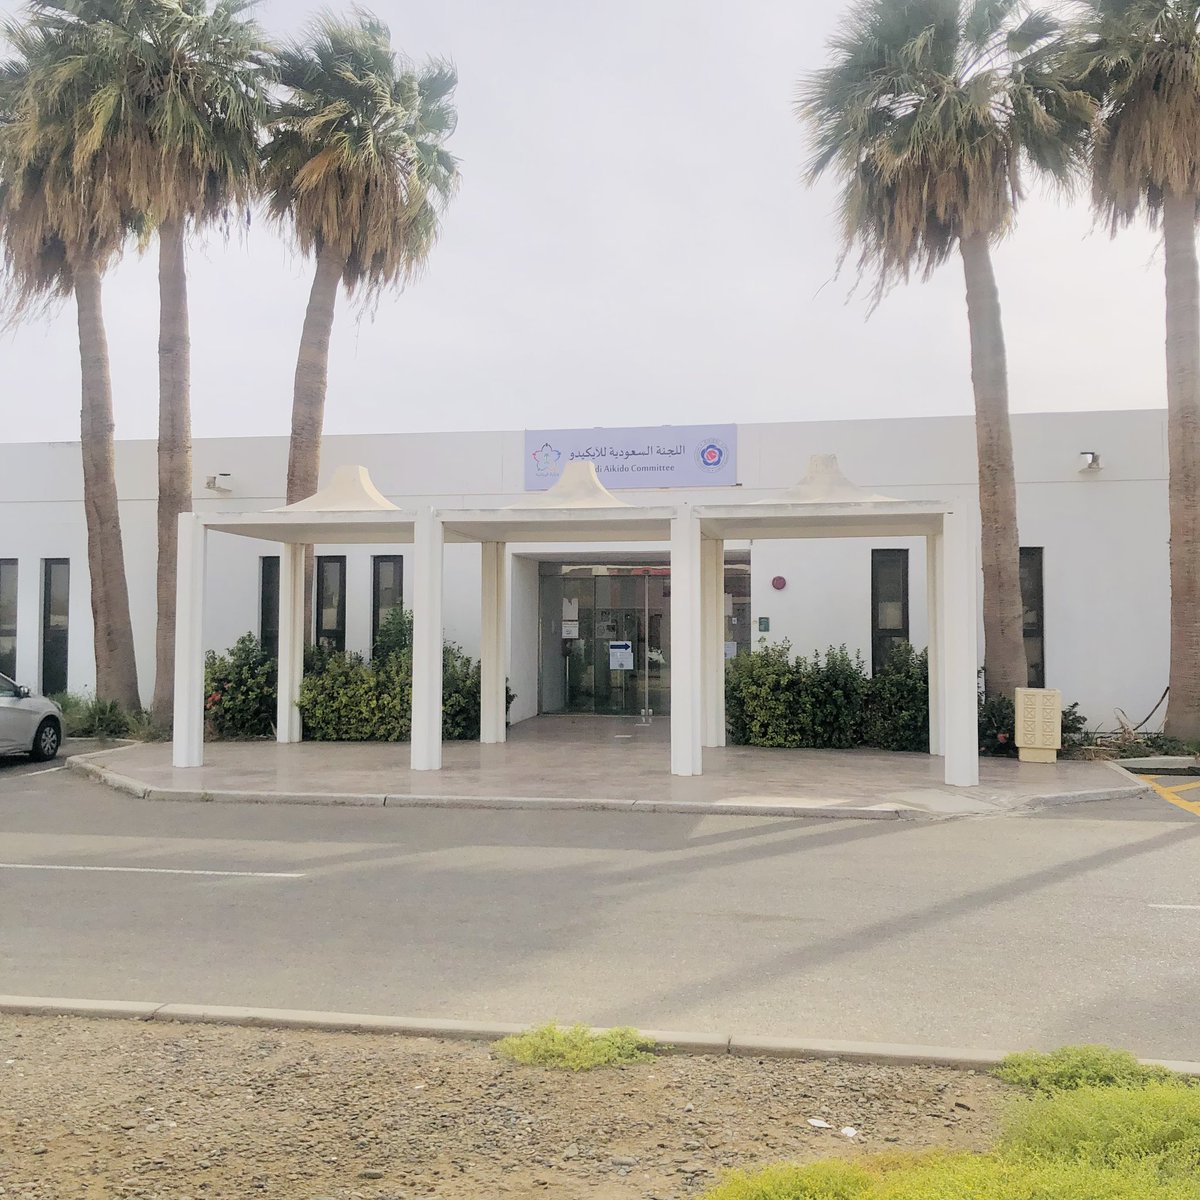 The Royal Commission at Yanbu Industrial City provided one of their buildings to be used as headquarter for the Saudi Aikido Committee. The facility is more than 1900 m2. The request was made through the Ministry of Sports and the Saudi Olympic and Paralympic Committee.